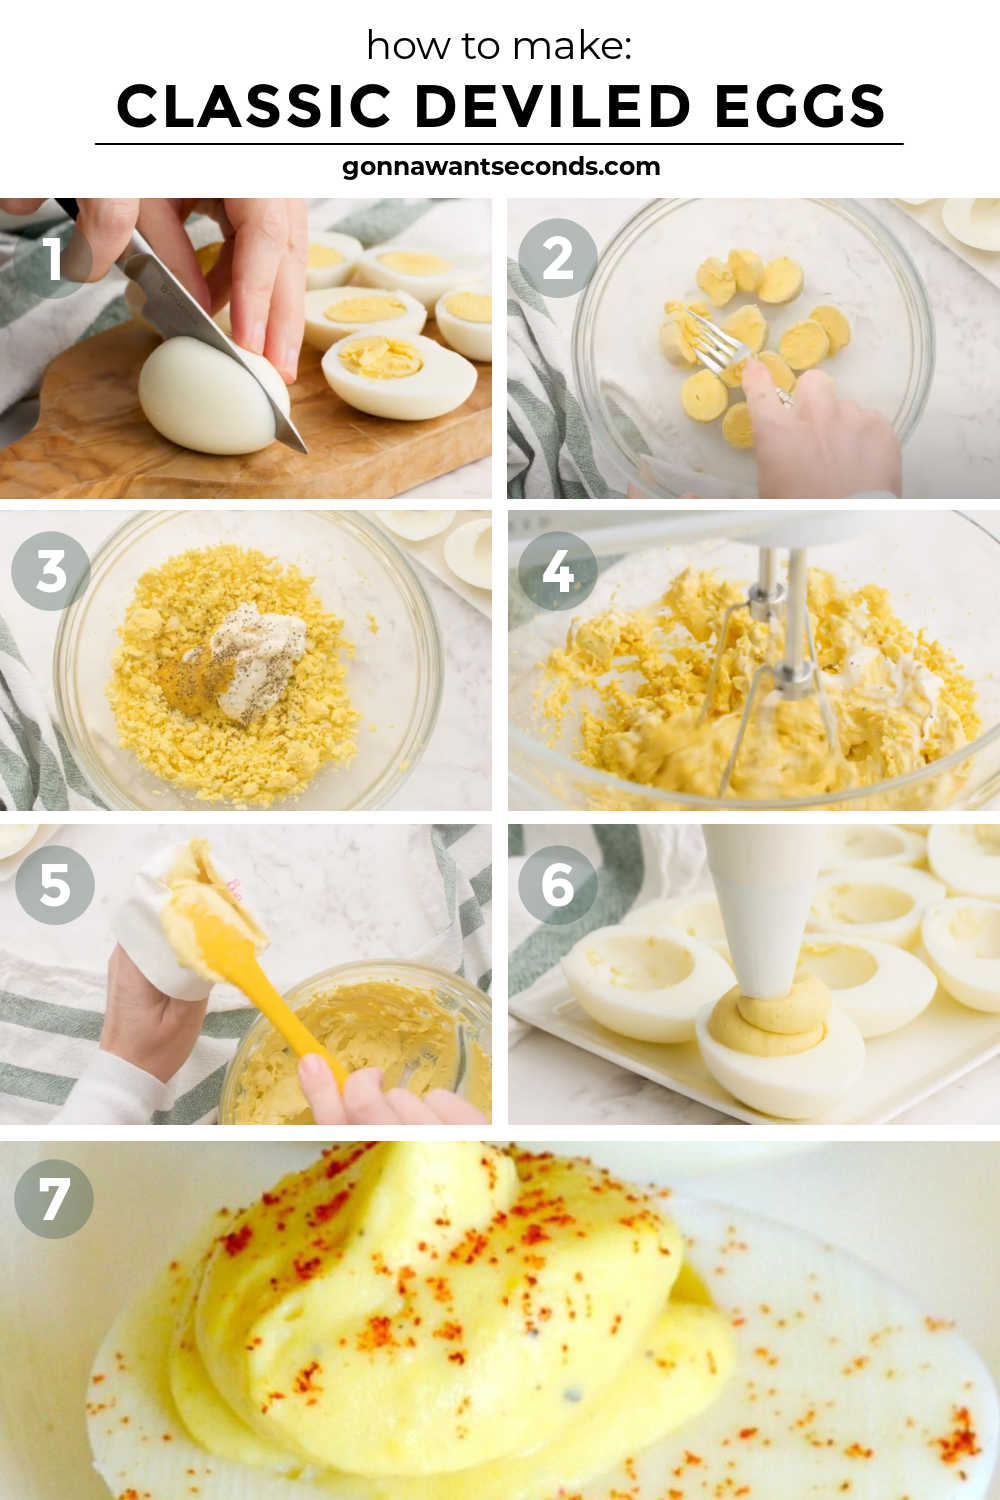 Step by step how to make classic deviled eggs